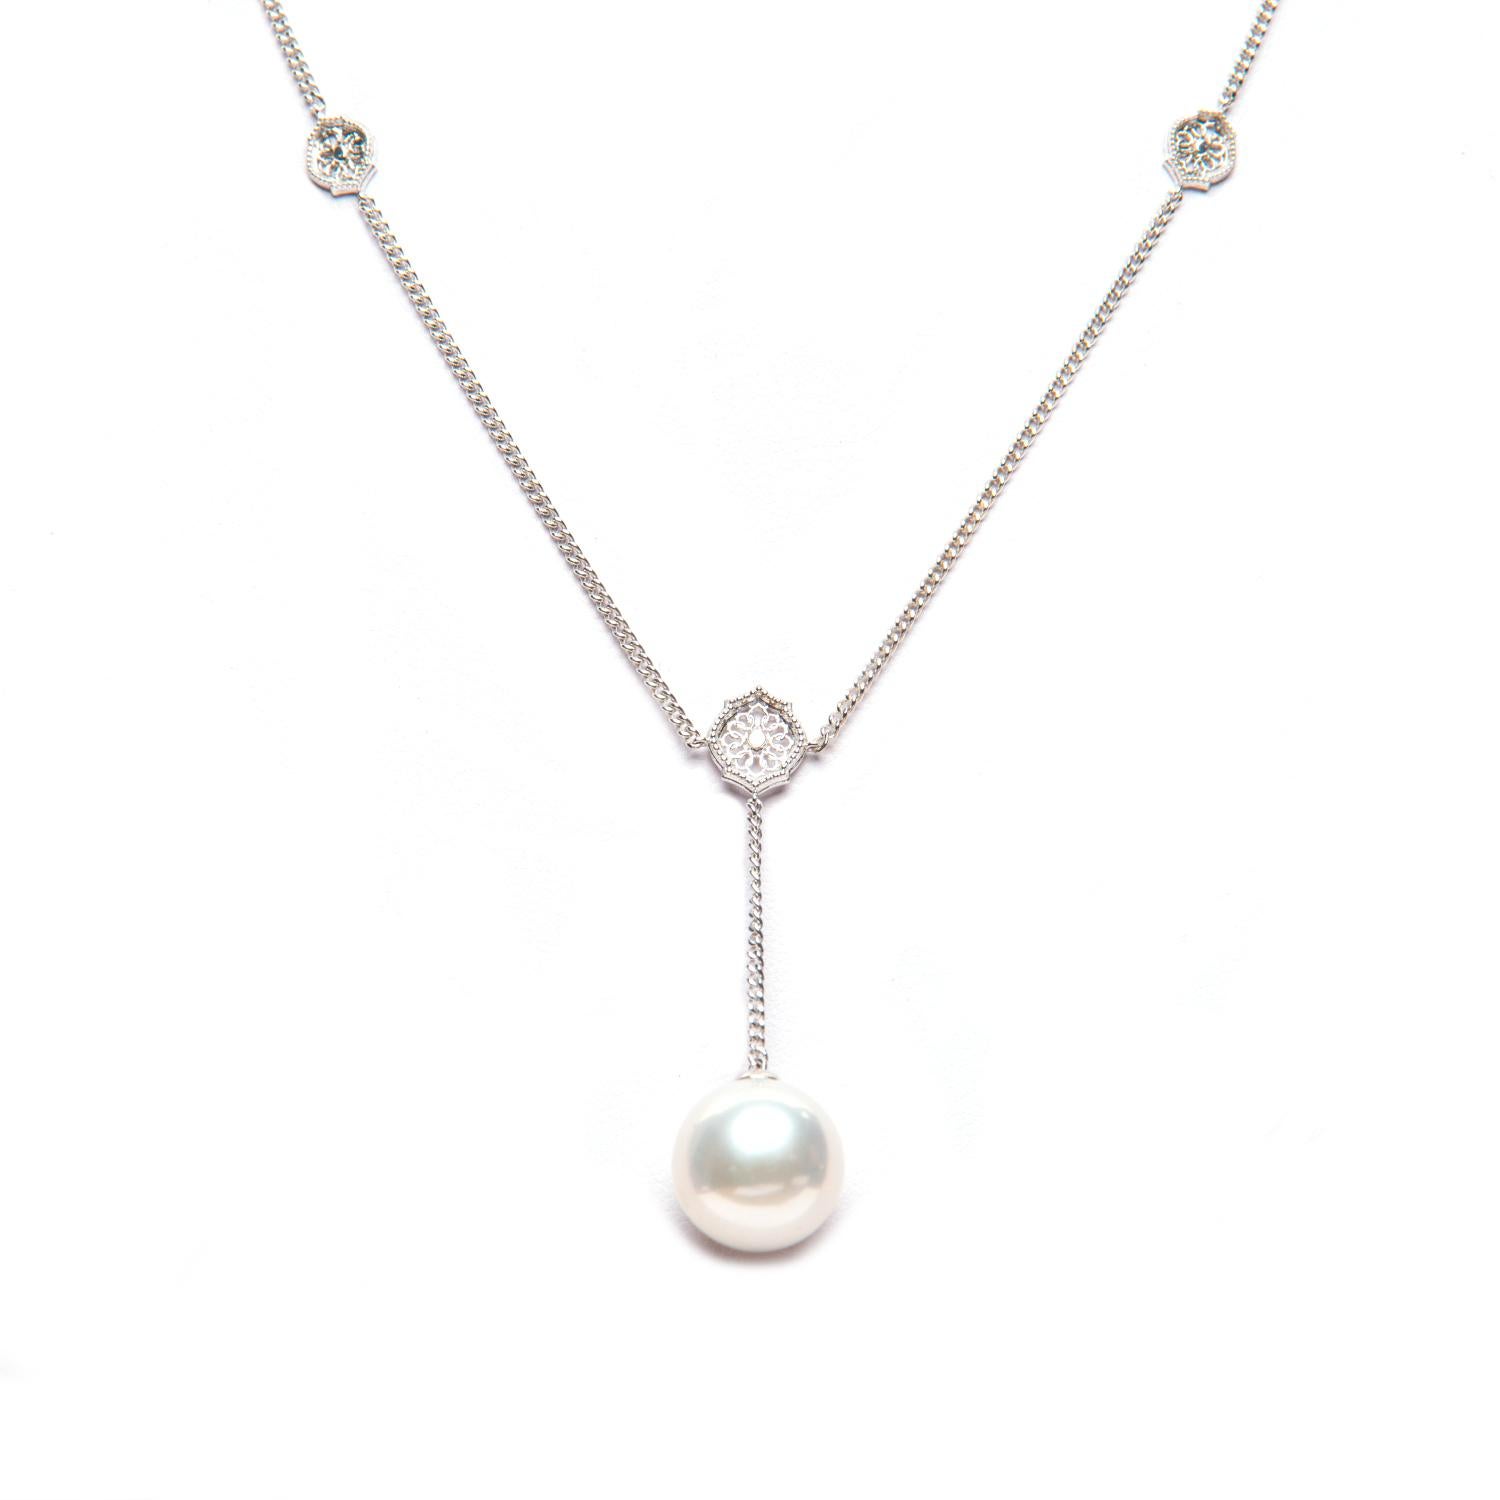 The ‘Mauresque’ Pearl Necklace by Natalie Barney features a 12mm Freshwater Pearl with small Arabesque shape settings. It is a classical piece and comes with the matching drop earrings. Can be worn at both 42cm and 45cm.

Made in sterling silver.